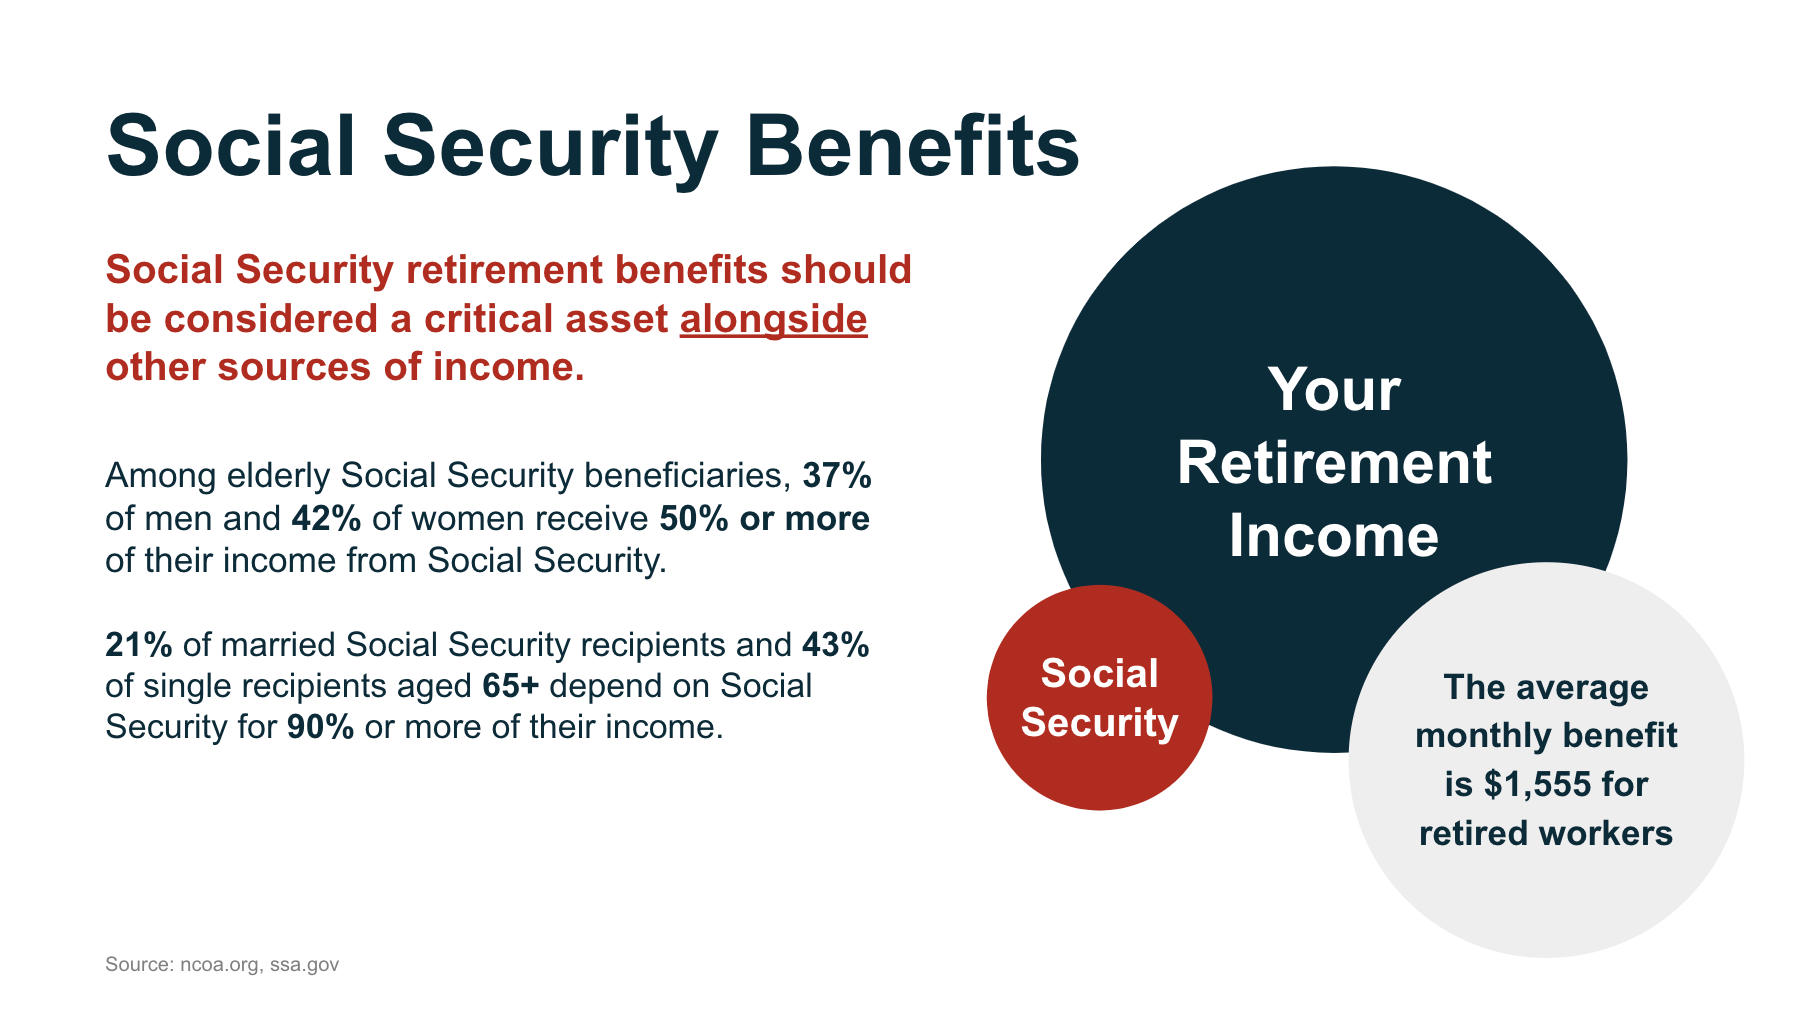 social security benefits as part of retirement income